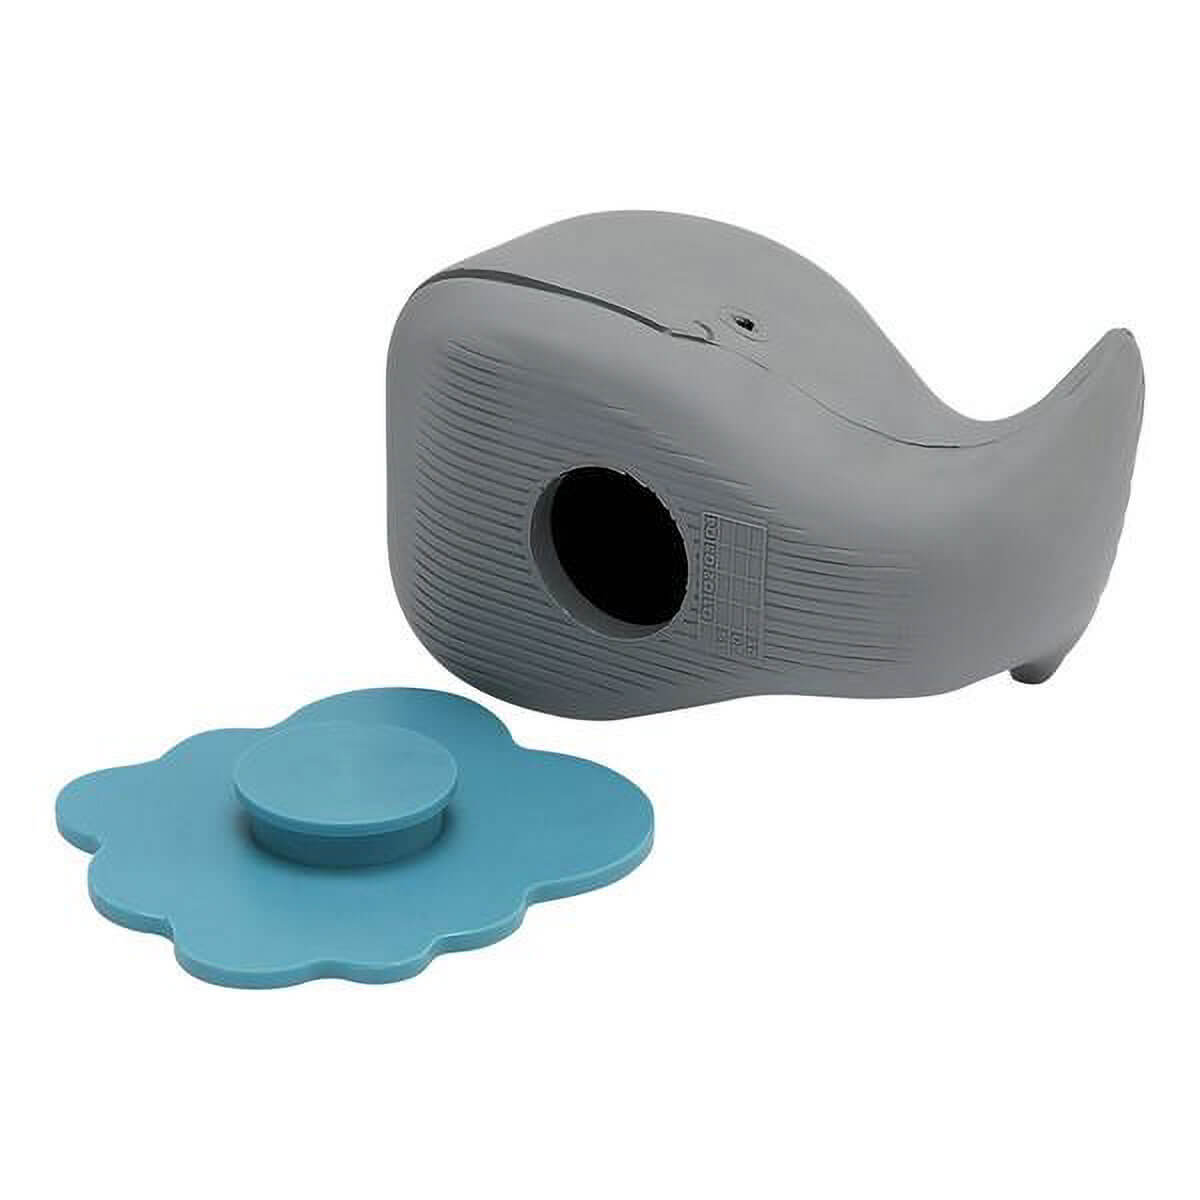 Whale (Grey - Ingolf) and Turtle (Mint- Dagmar) Gift Set - Natural Rubber - Hevea